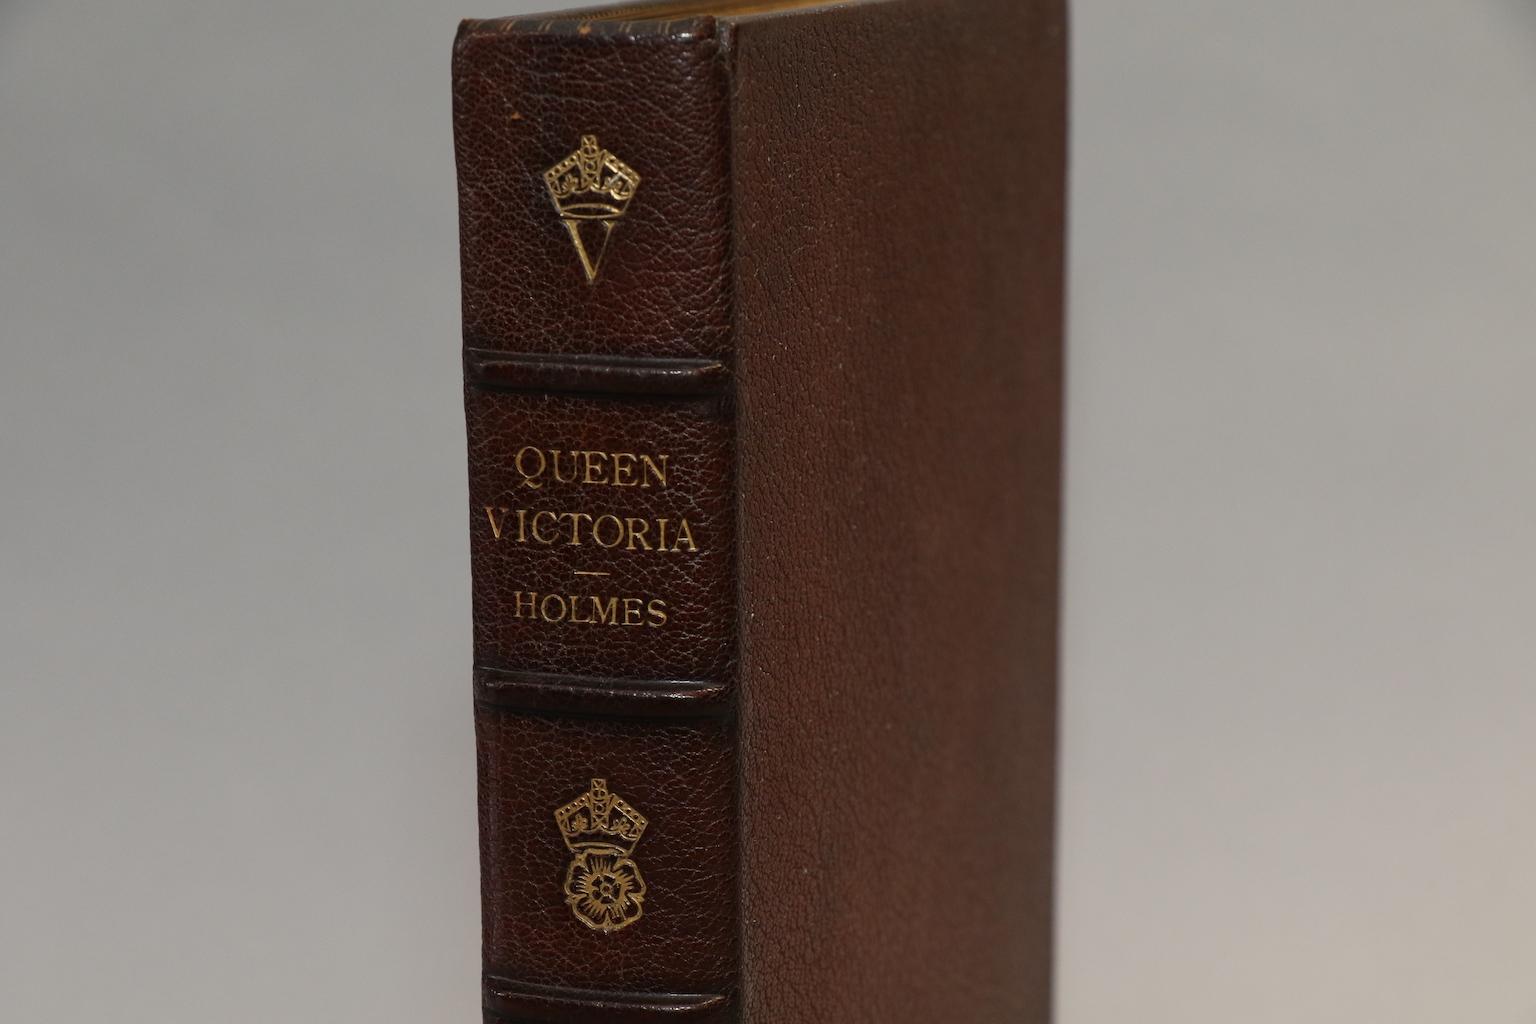 Leatherbound. 1 volume. Folio. Bound in full brown Morocco with top edges gilt, raised bands, and gilt panels. Profusely illustrated throughout, including a colored frontispiece. Very good. Published in London and Paris by Valodon & Co. in